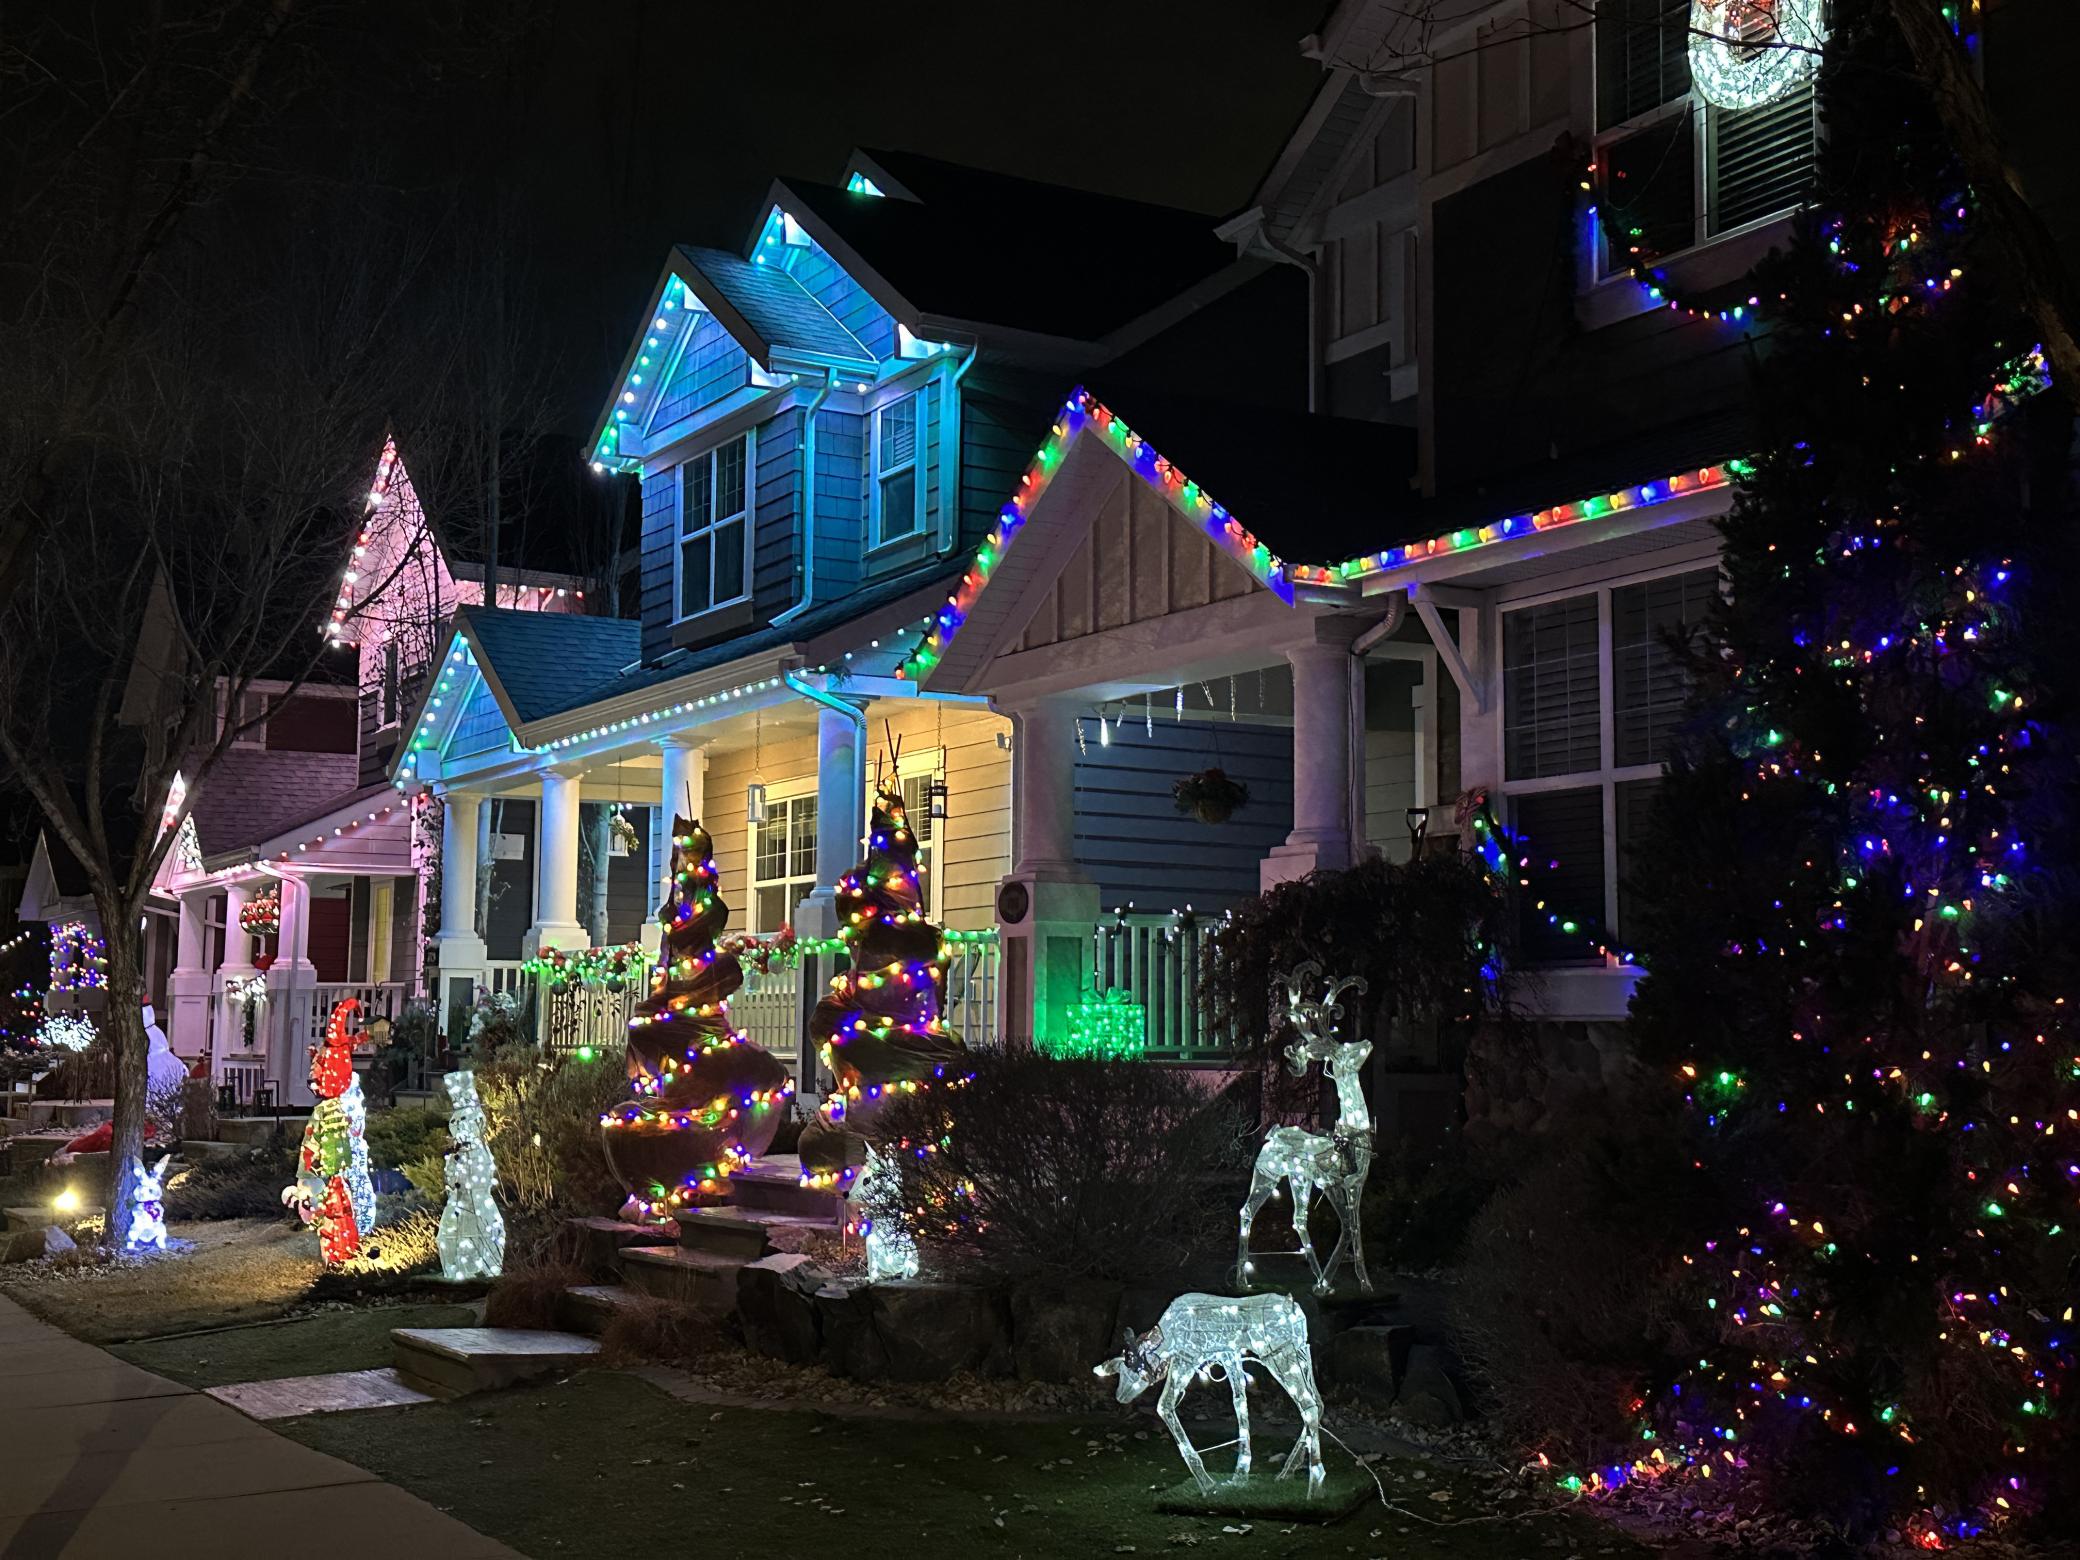 Three homes decorated with lights and Christmas ornaments standing on the lawns.